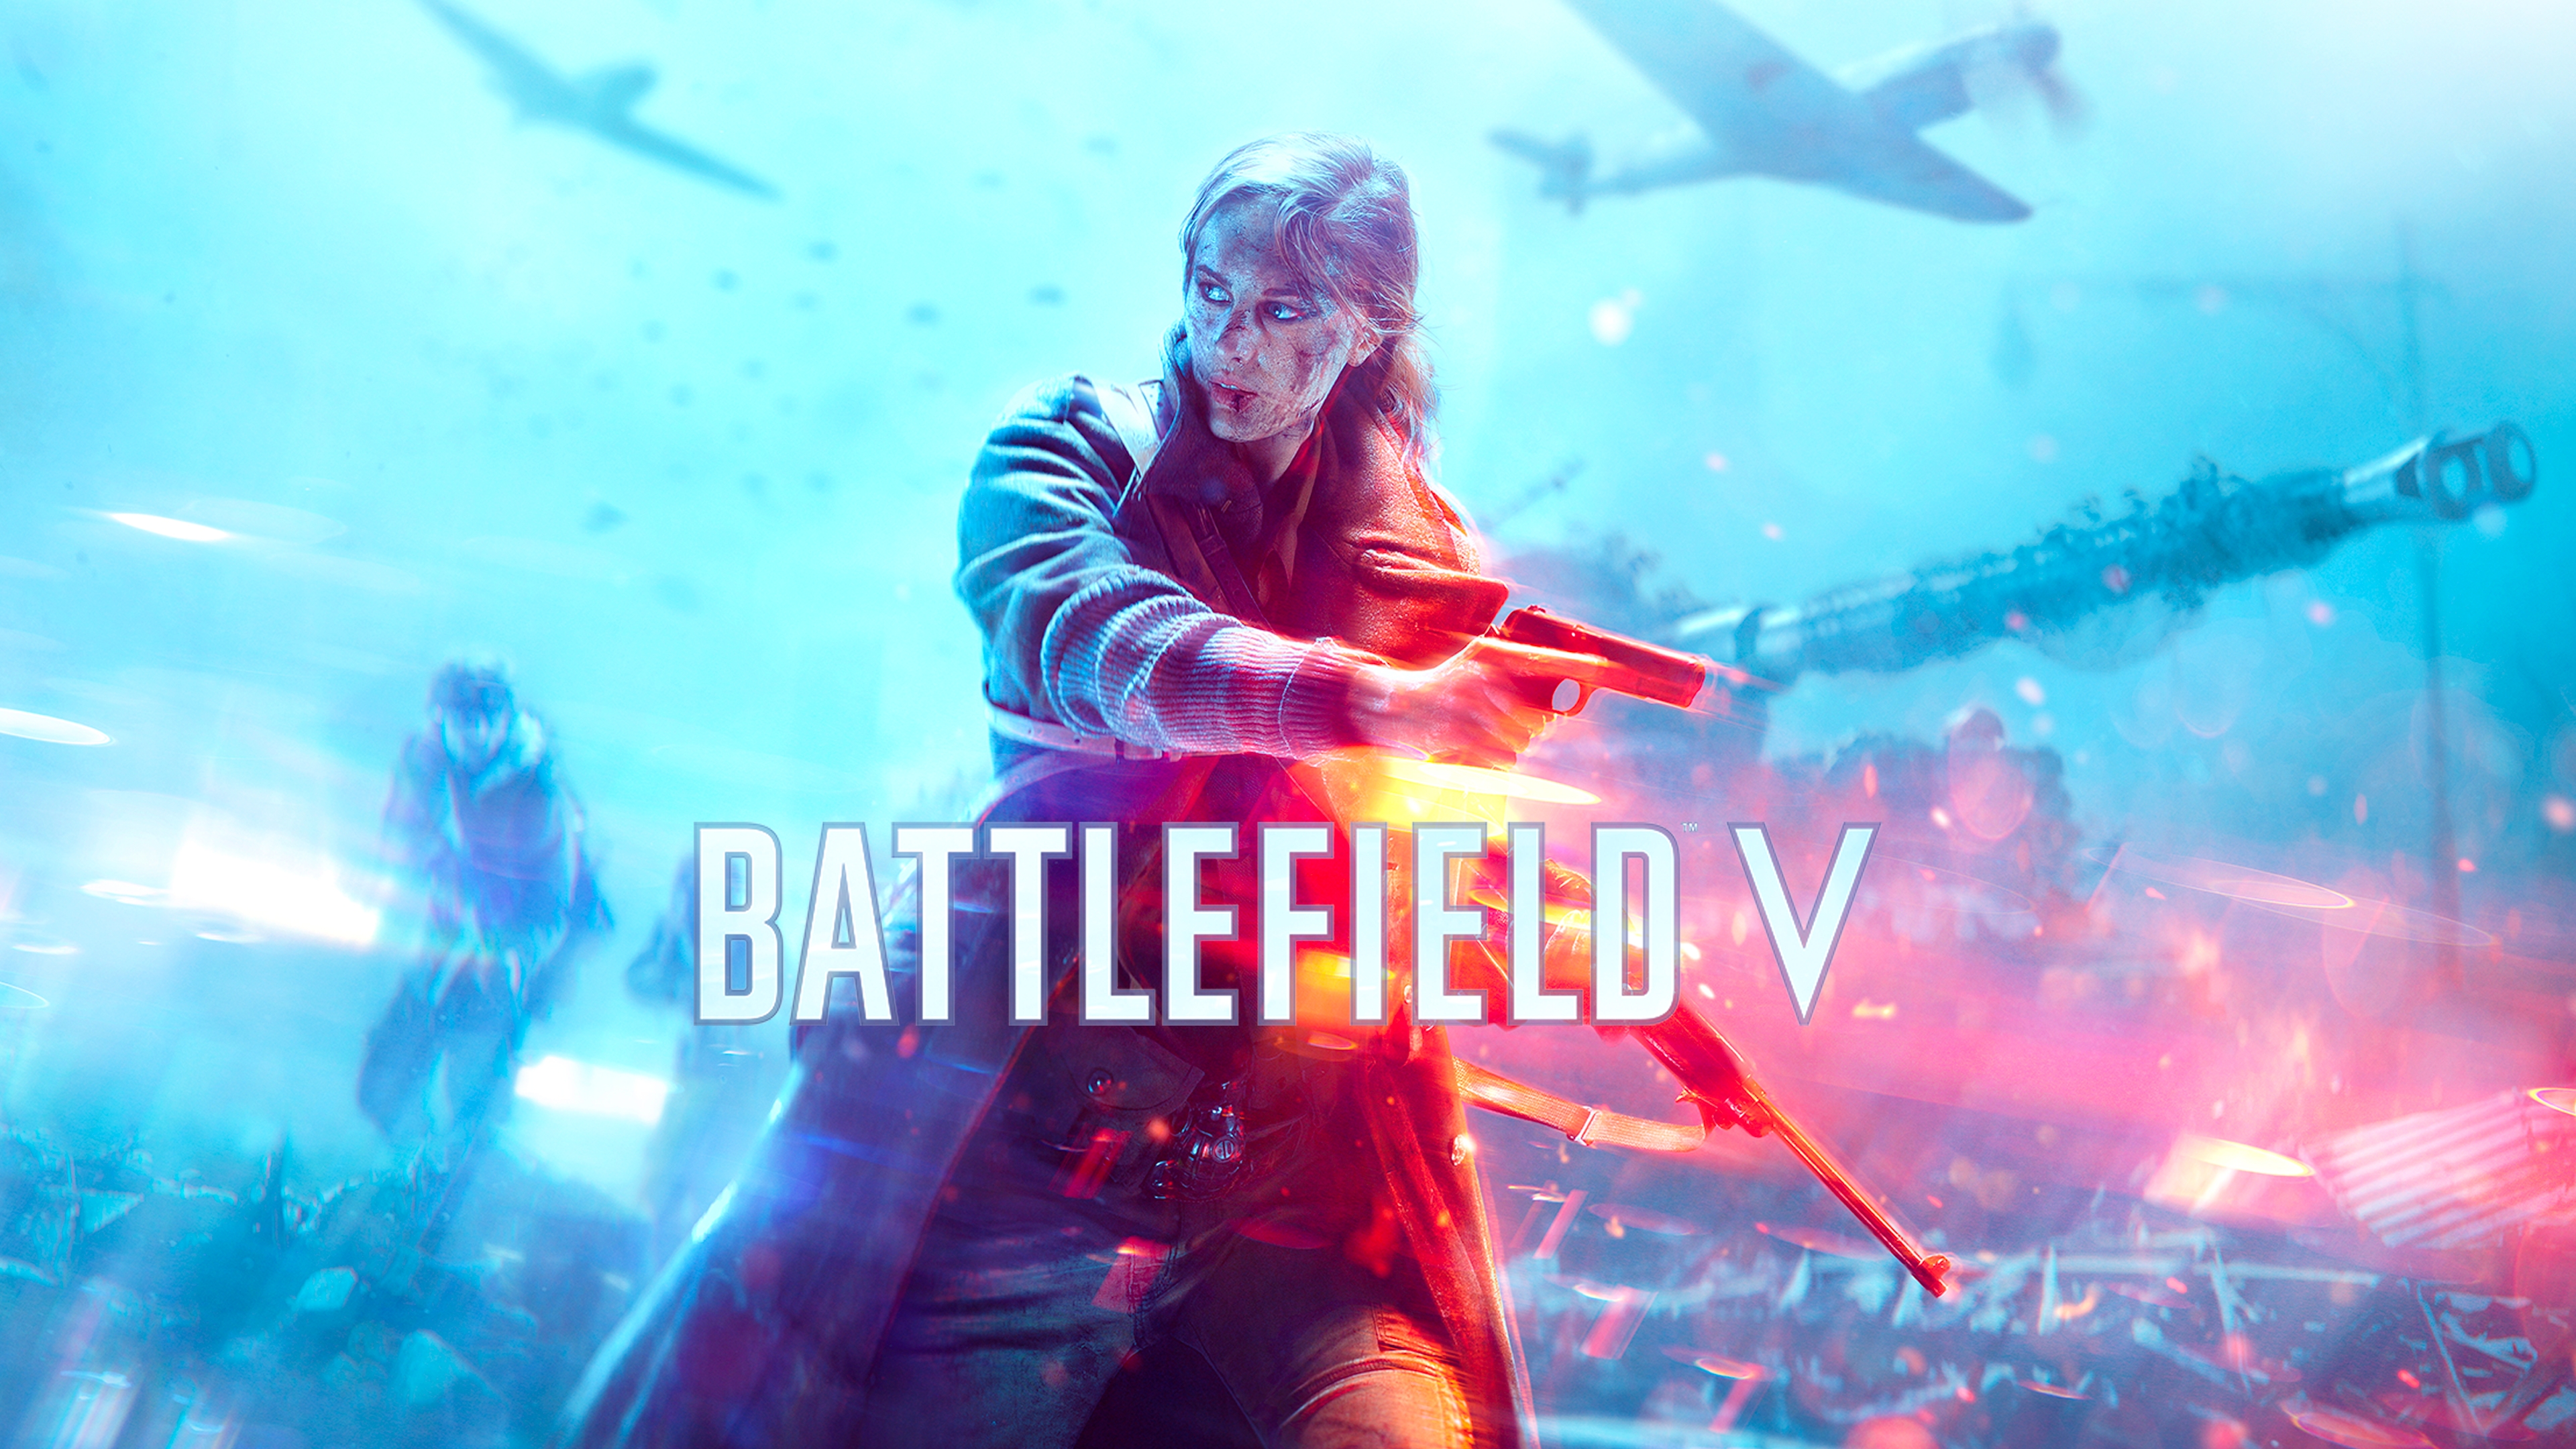 UPDATE] Free Battlefield V on Steam from August 26th?